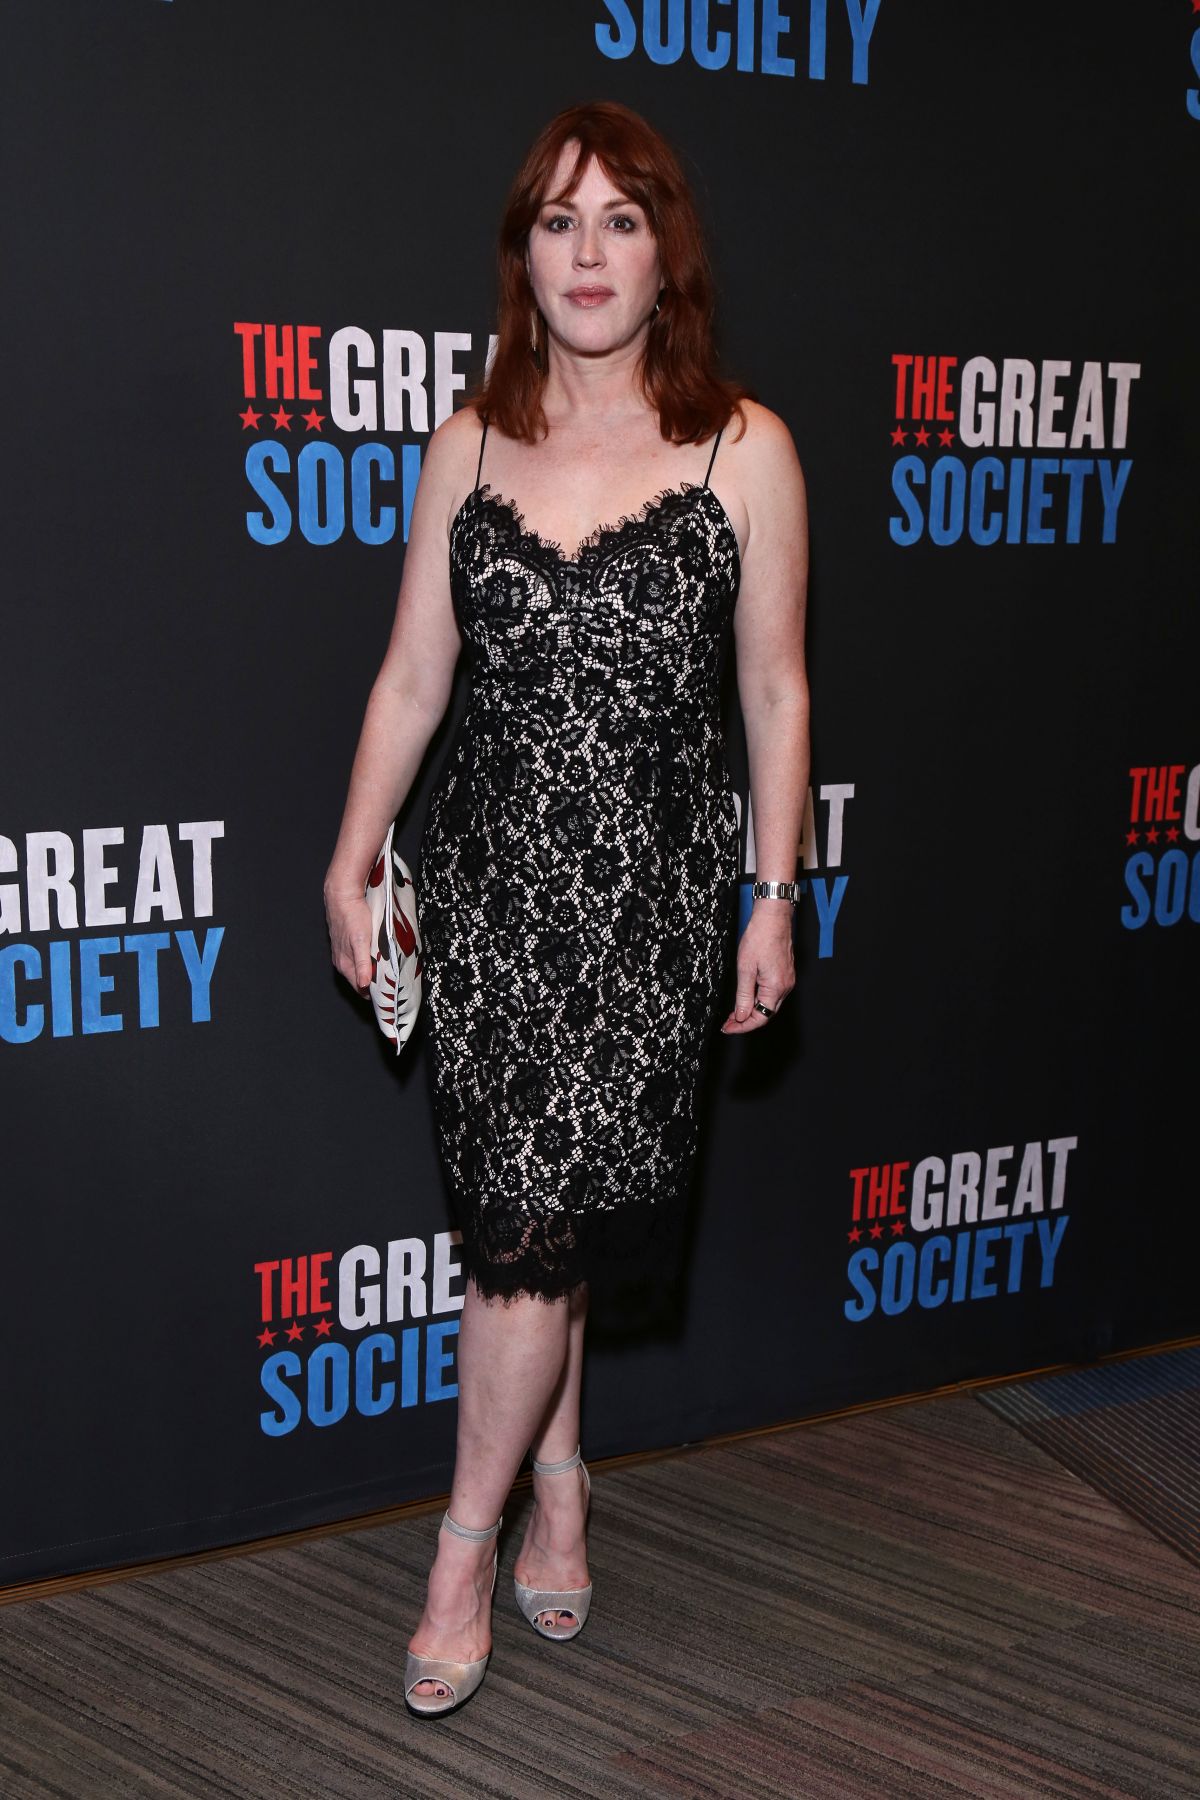 MOLLY RINGWALD at The Great Society Play Opening Night in New York 10/01/20...